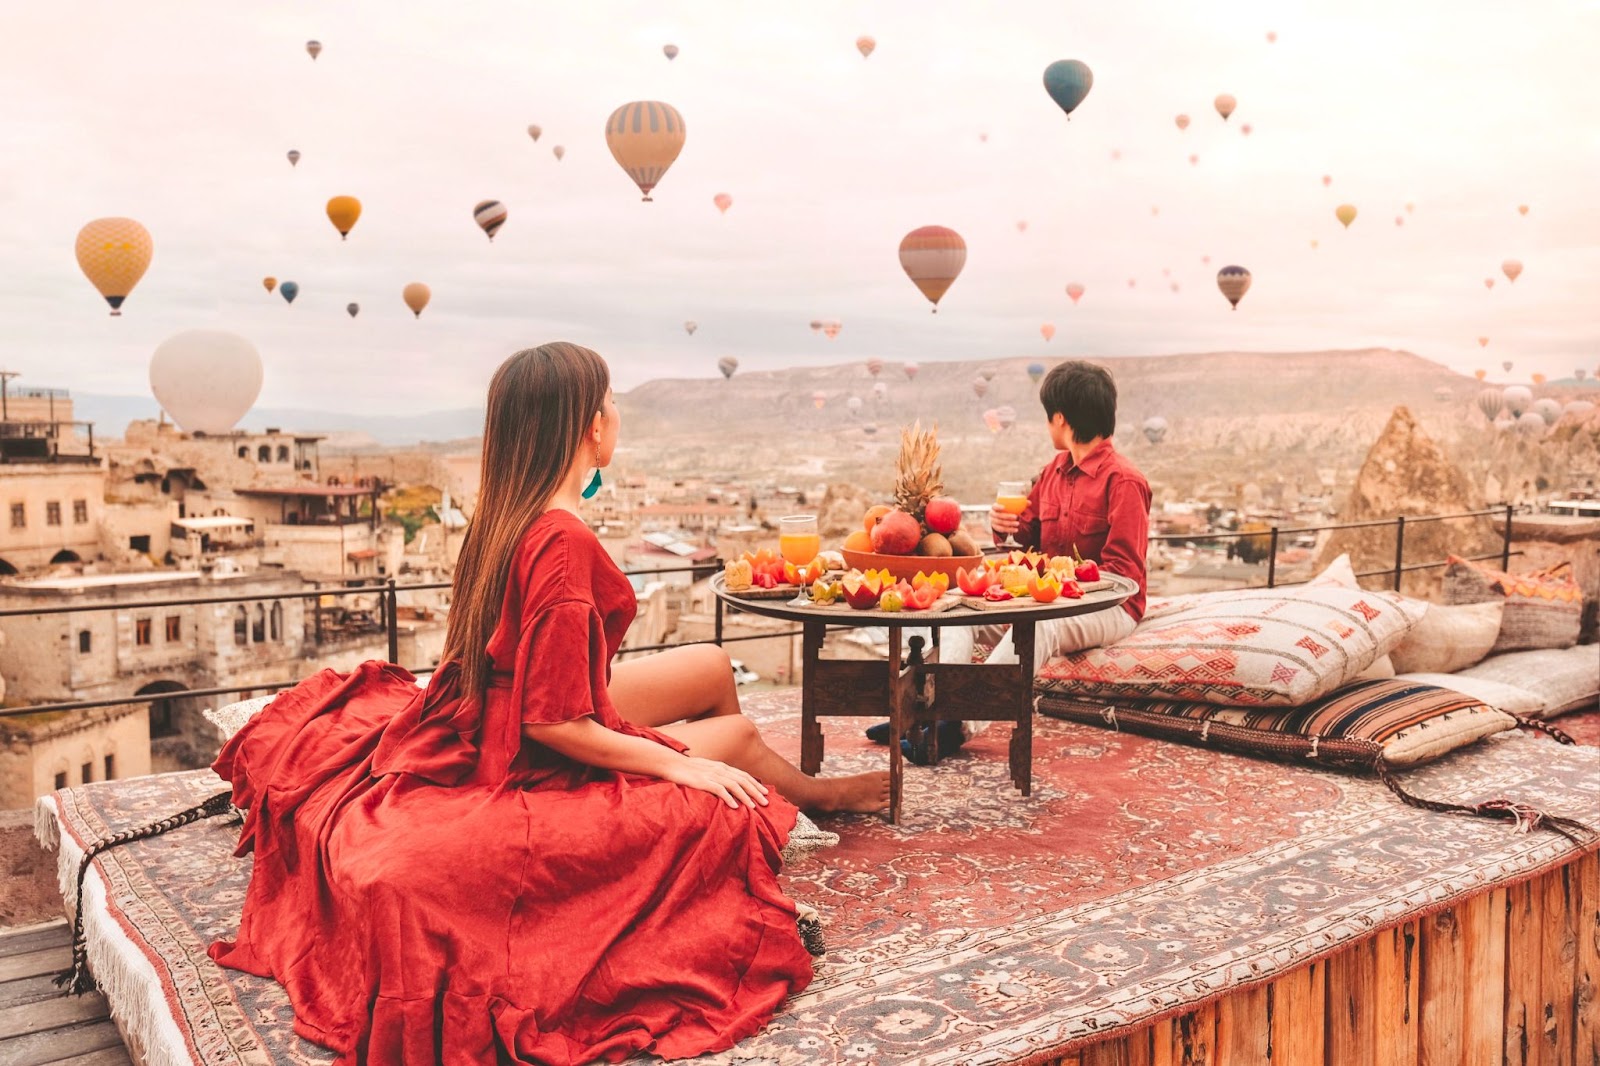 Cappadocia, maldives & bali - 3 most indulgent destinations for a long getaway. Here’s how you can win a sponsored trip by vochelle! | weirdkaya